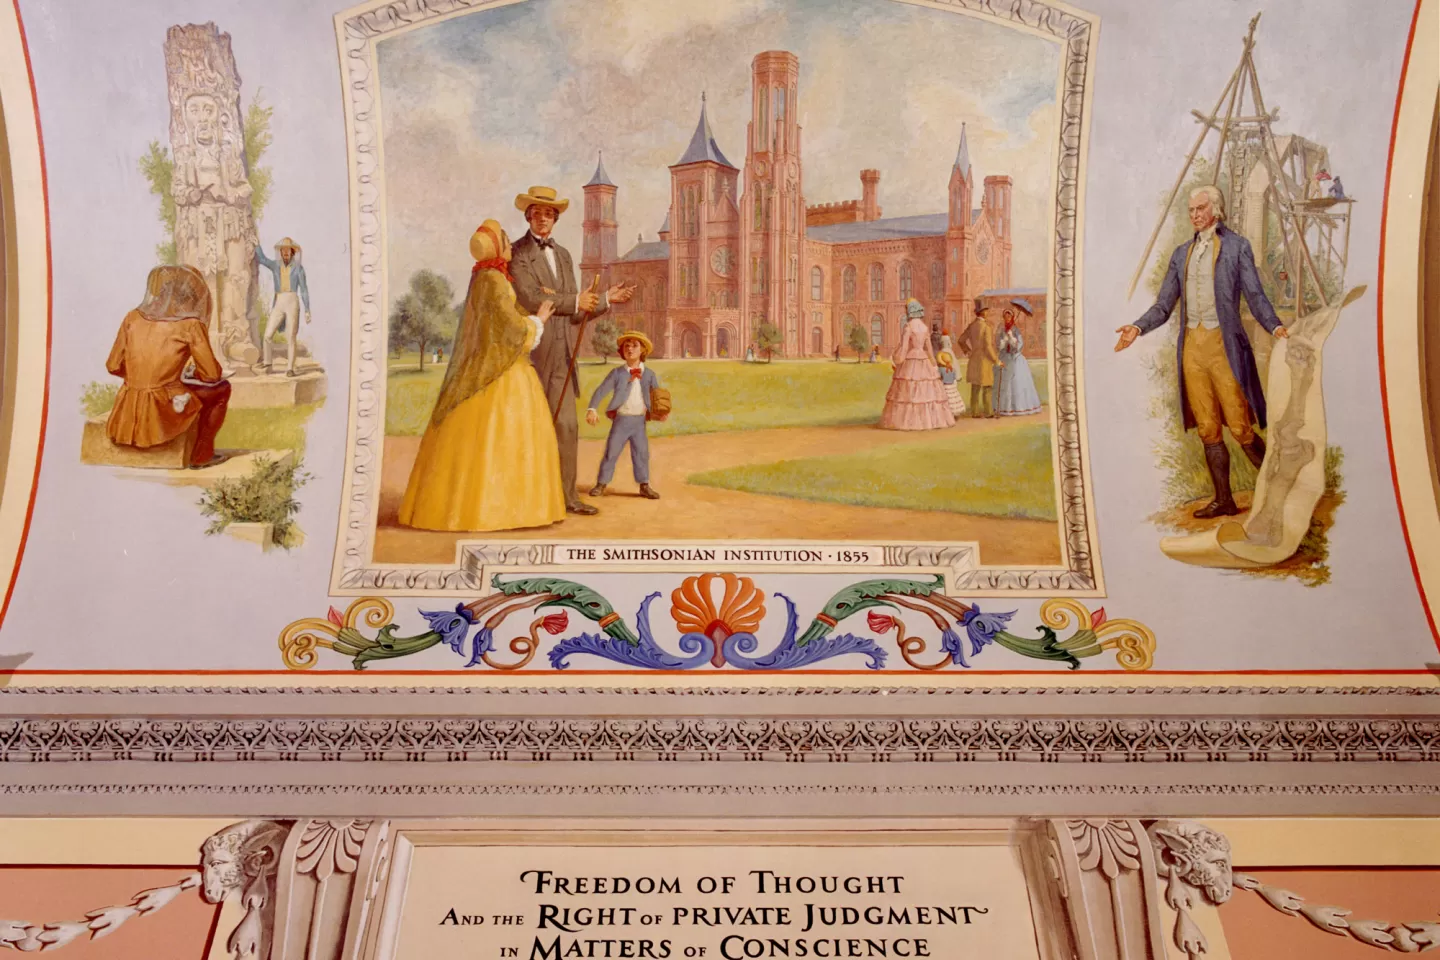 "The Smithsonian Institution, 1855" by Allyn Cox